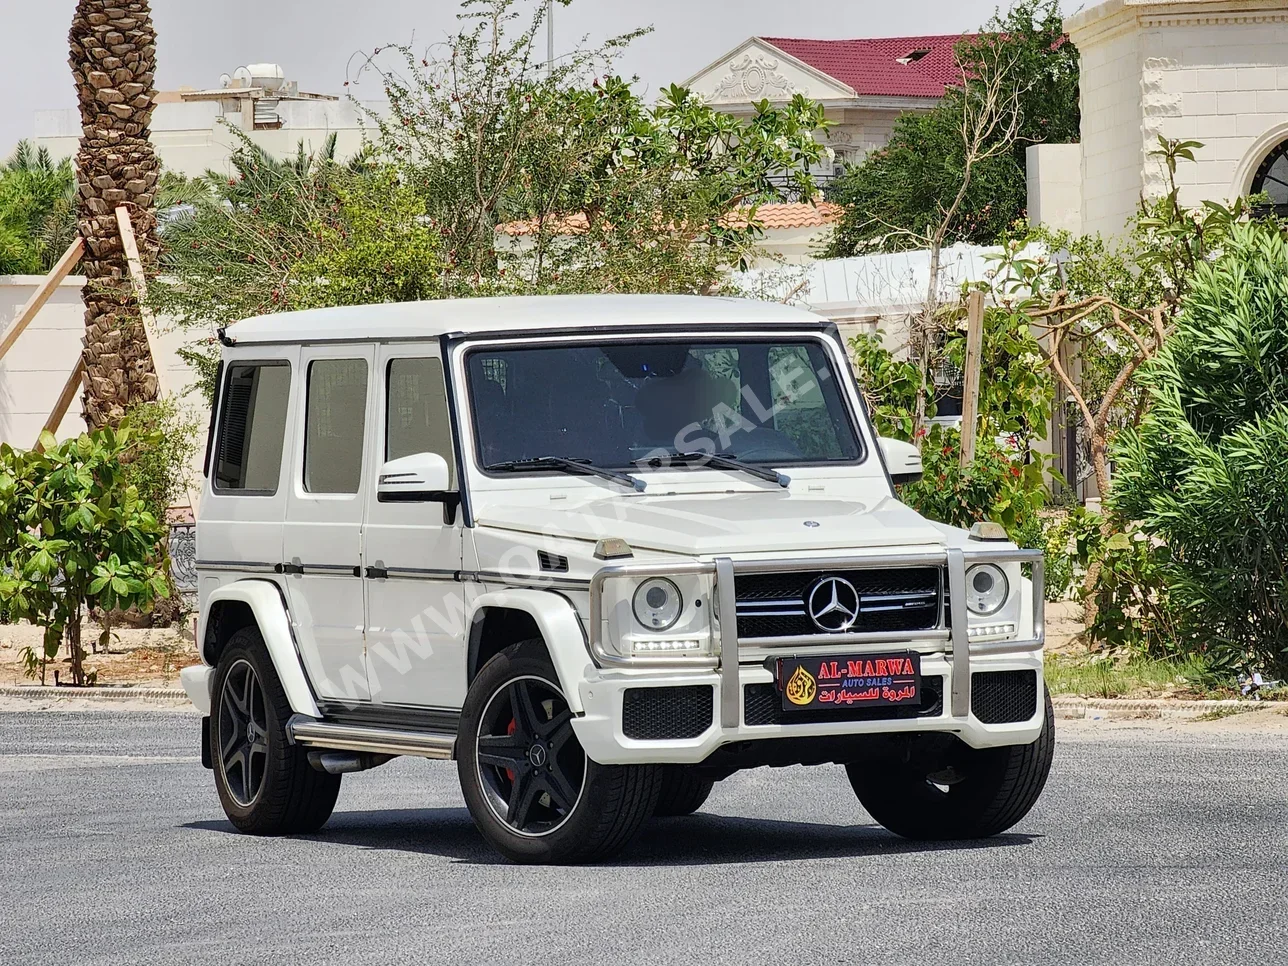 Mercedes-Benz  G-Class  63 AMG  2015  Automatic  143,000 Km  8 Cylinder  Four Wheel Drive (4WD)  SUV  White